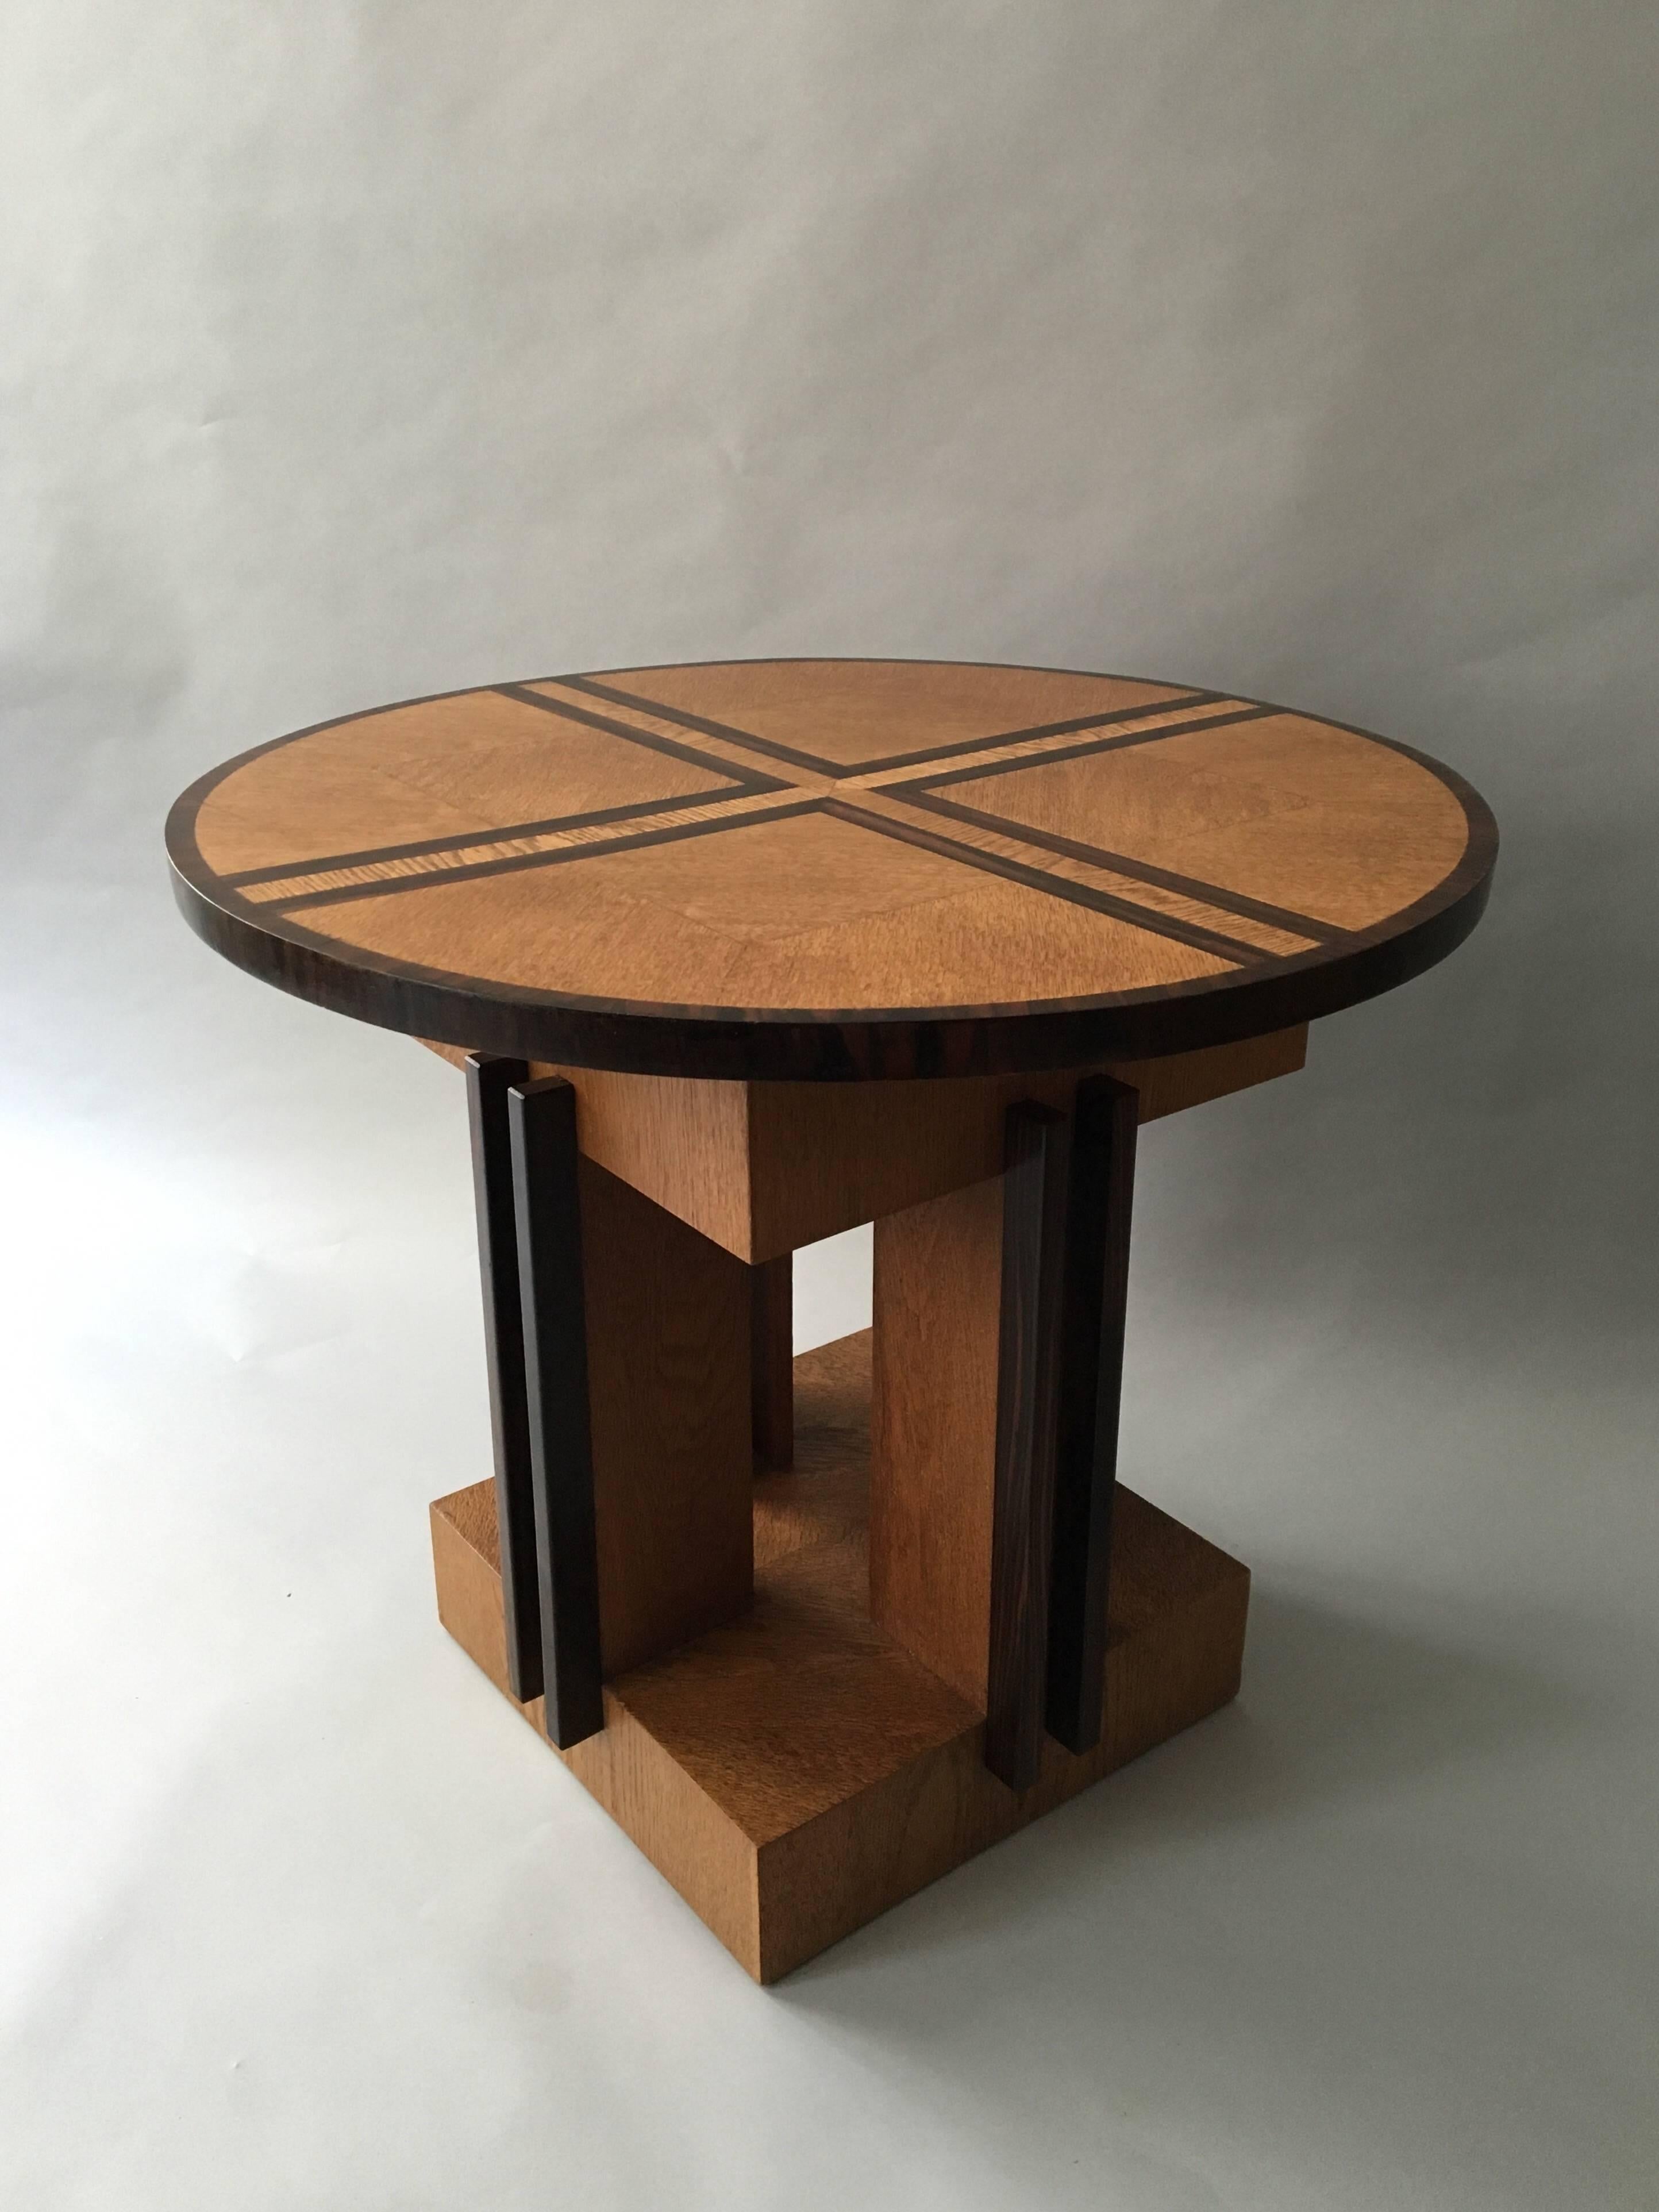 Hague school low table in oak and Macassar. During the interwar years (1919-1938) in the city of The Hague, a luxurious and modern design style was created. The Hague School is a variation of Art Deco and is recognizable by the straight and